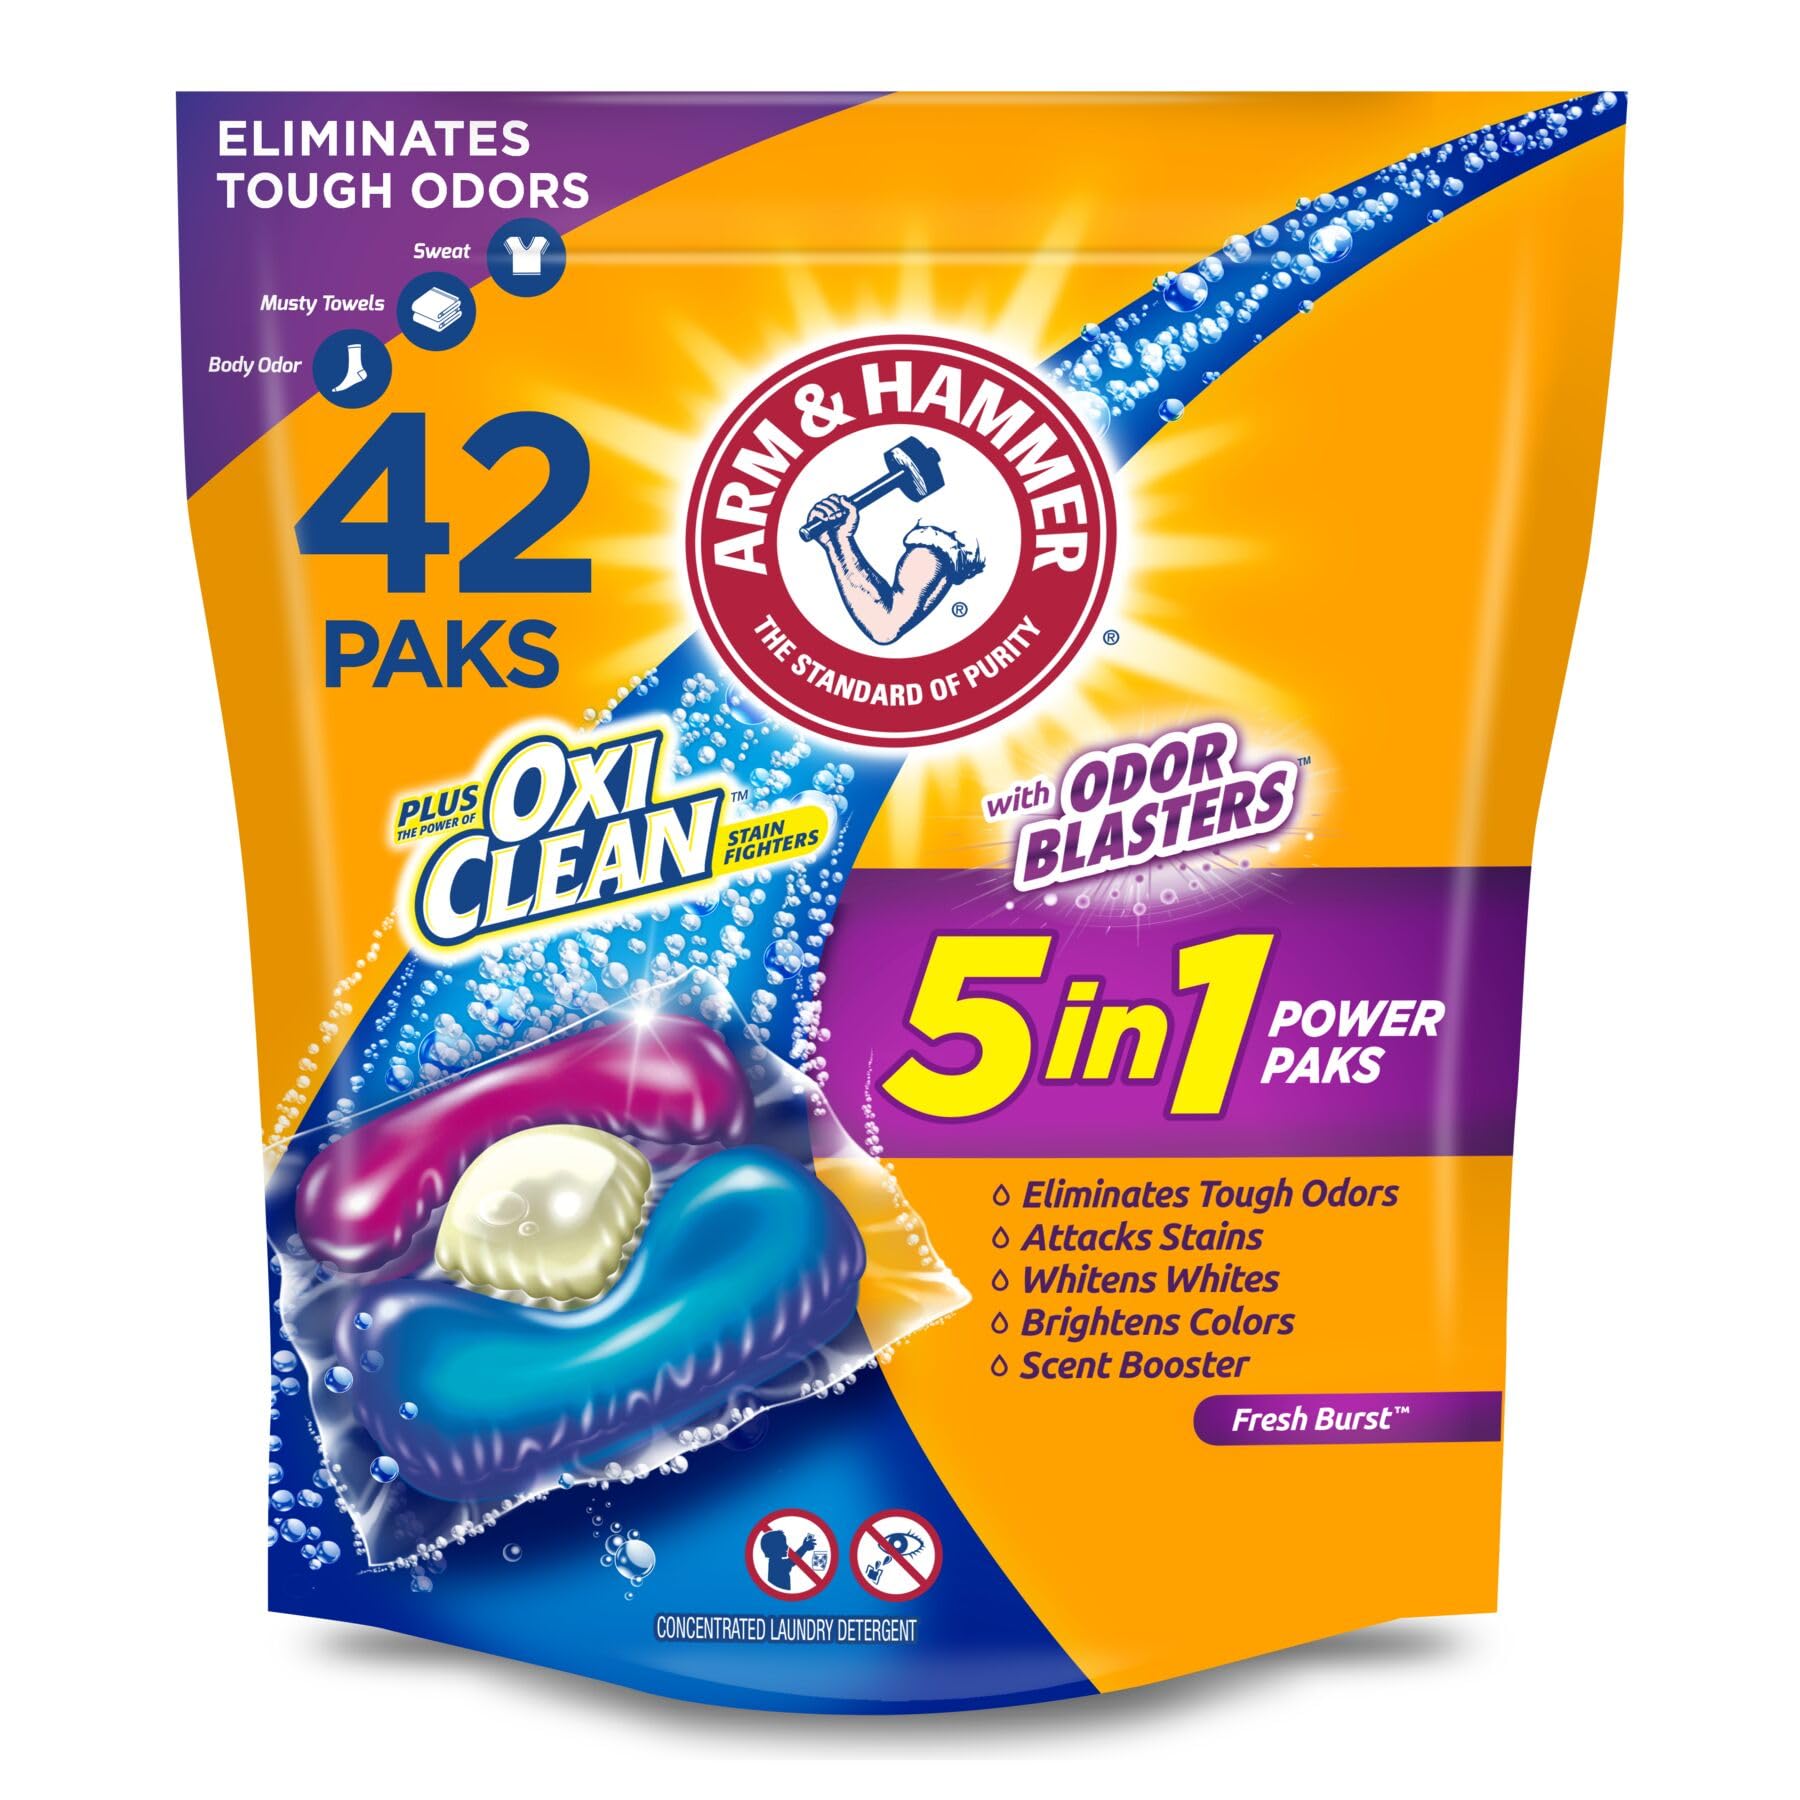 Arm & Hammer Plus OxiClean With Odor Blasters Laundry Detergent 5-IN-1 Power Paks, 42CT (Packaging may vary) Fresh Burst 42 Count, List Price is $9.99, Now Only $5.59